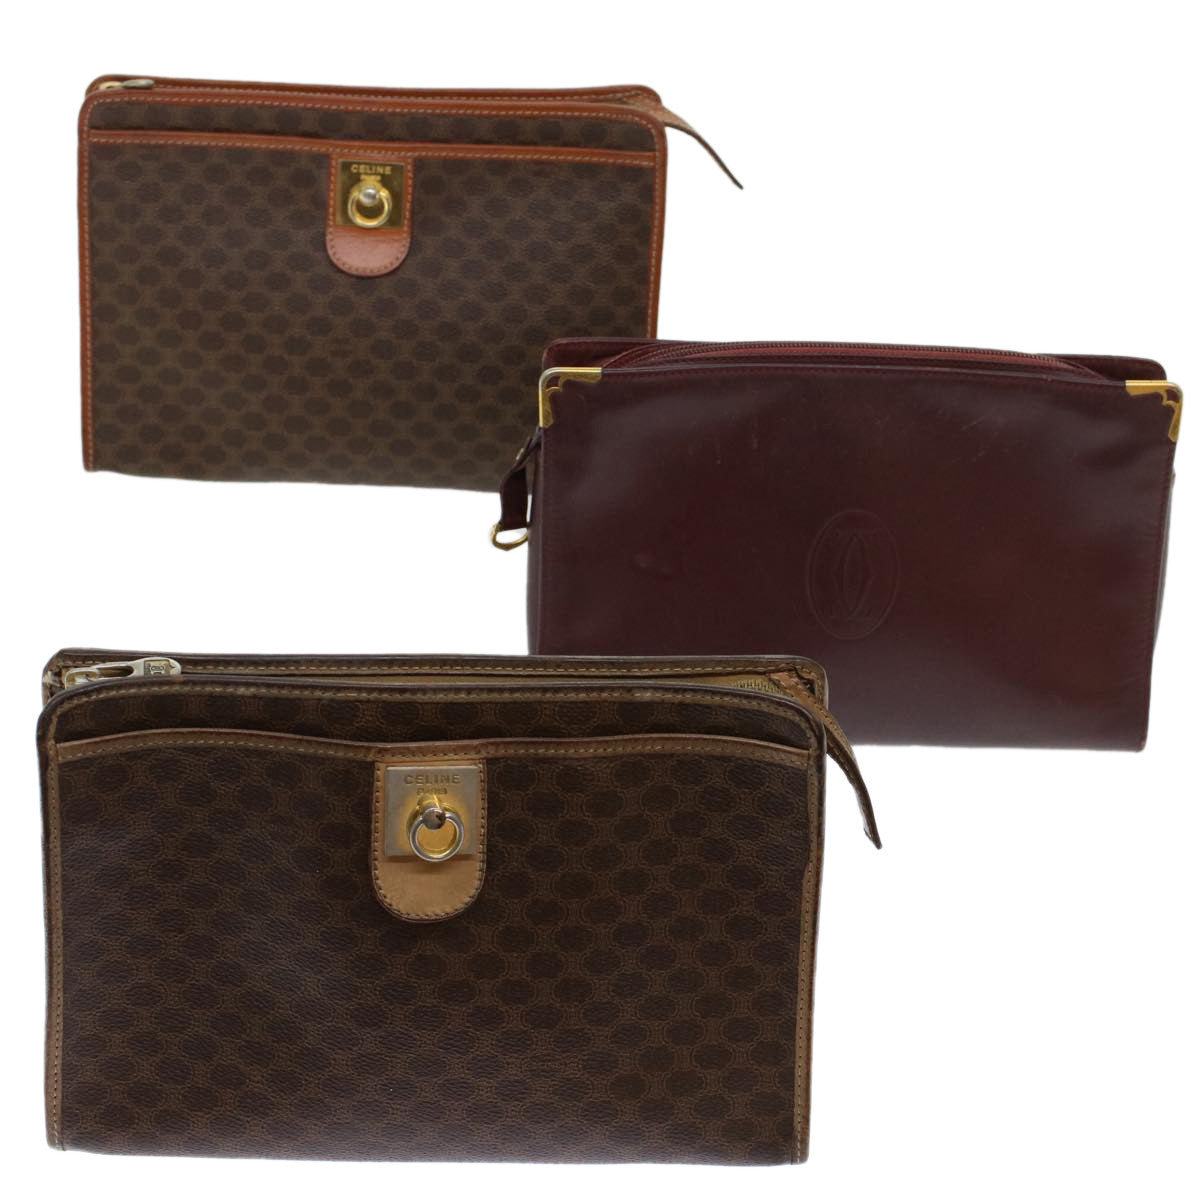 CELINE Cartier Macadam Canvas Clutch Bag Leather 3Set Wine Red Brown Auth bs6276